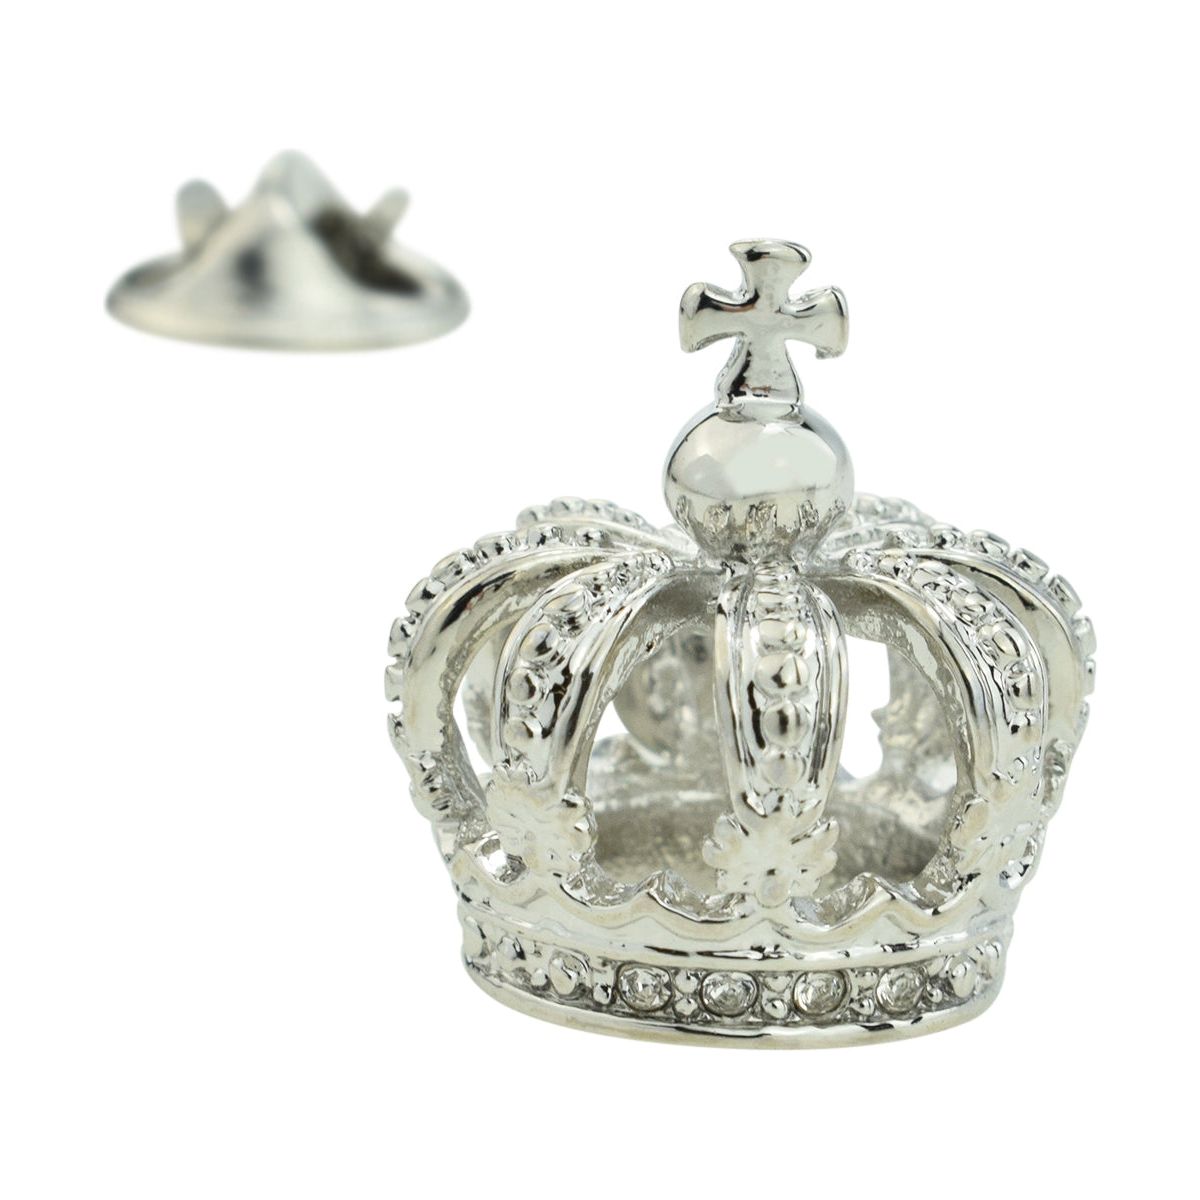 Rhodium Plated 3D Crown Lapel Pin Badge - Ashton and Finch